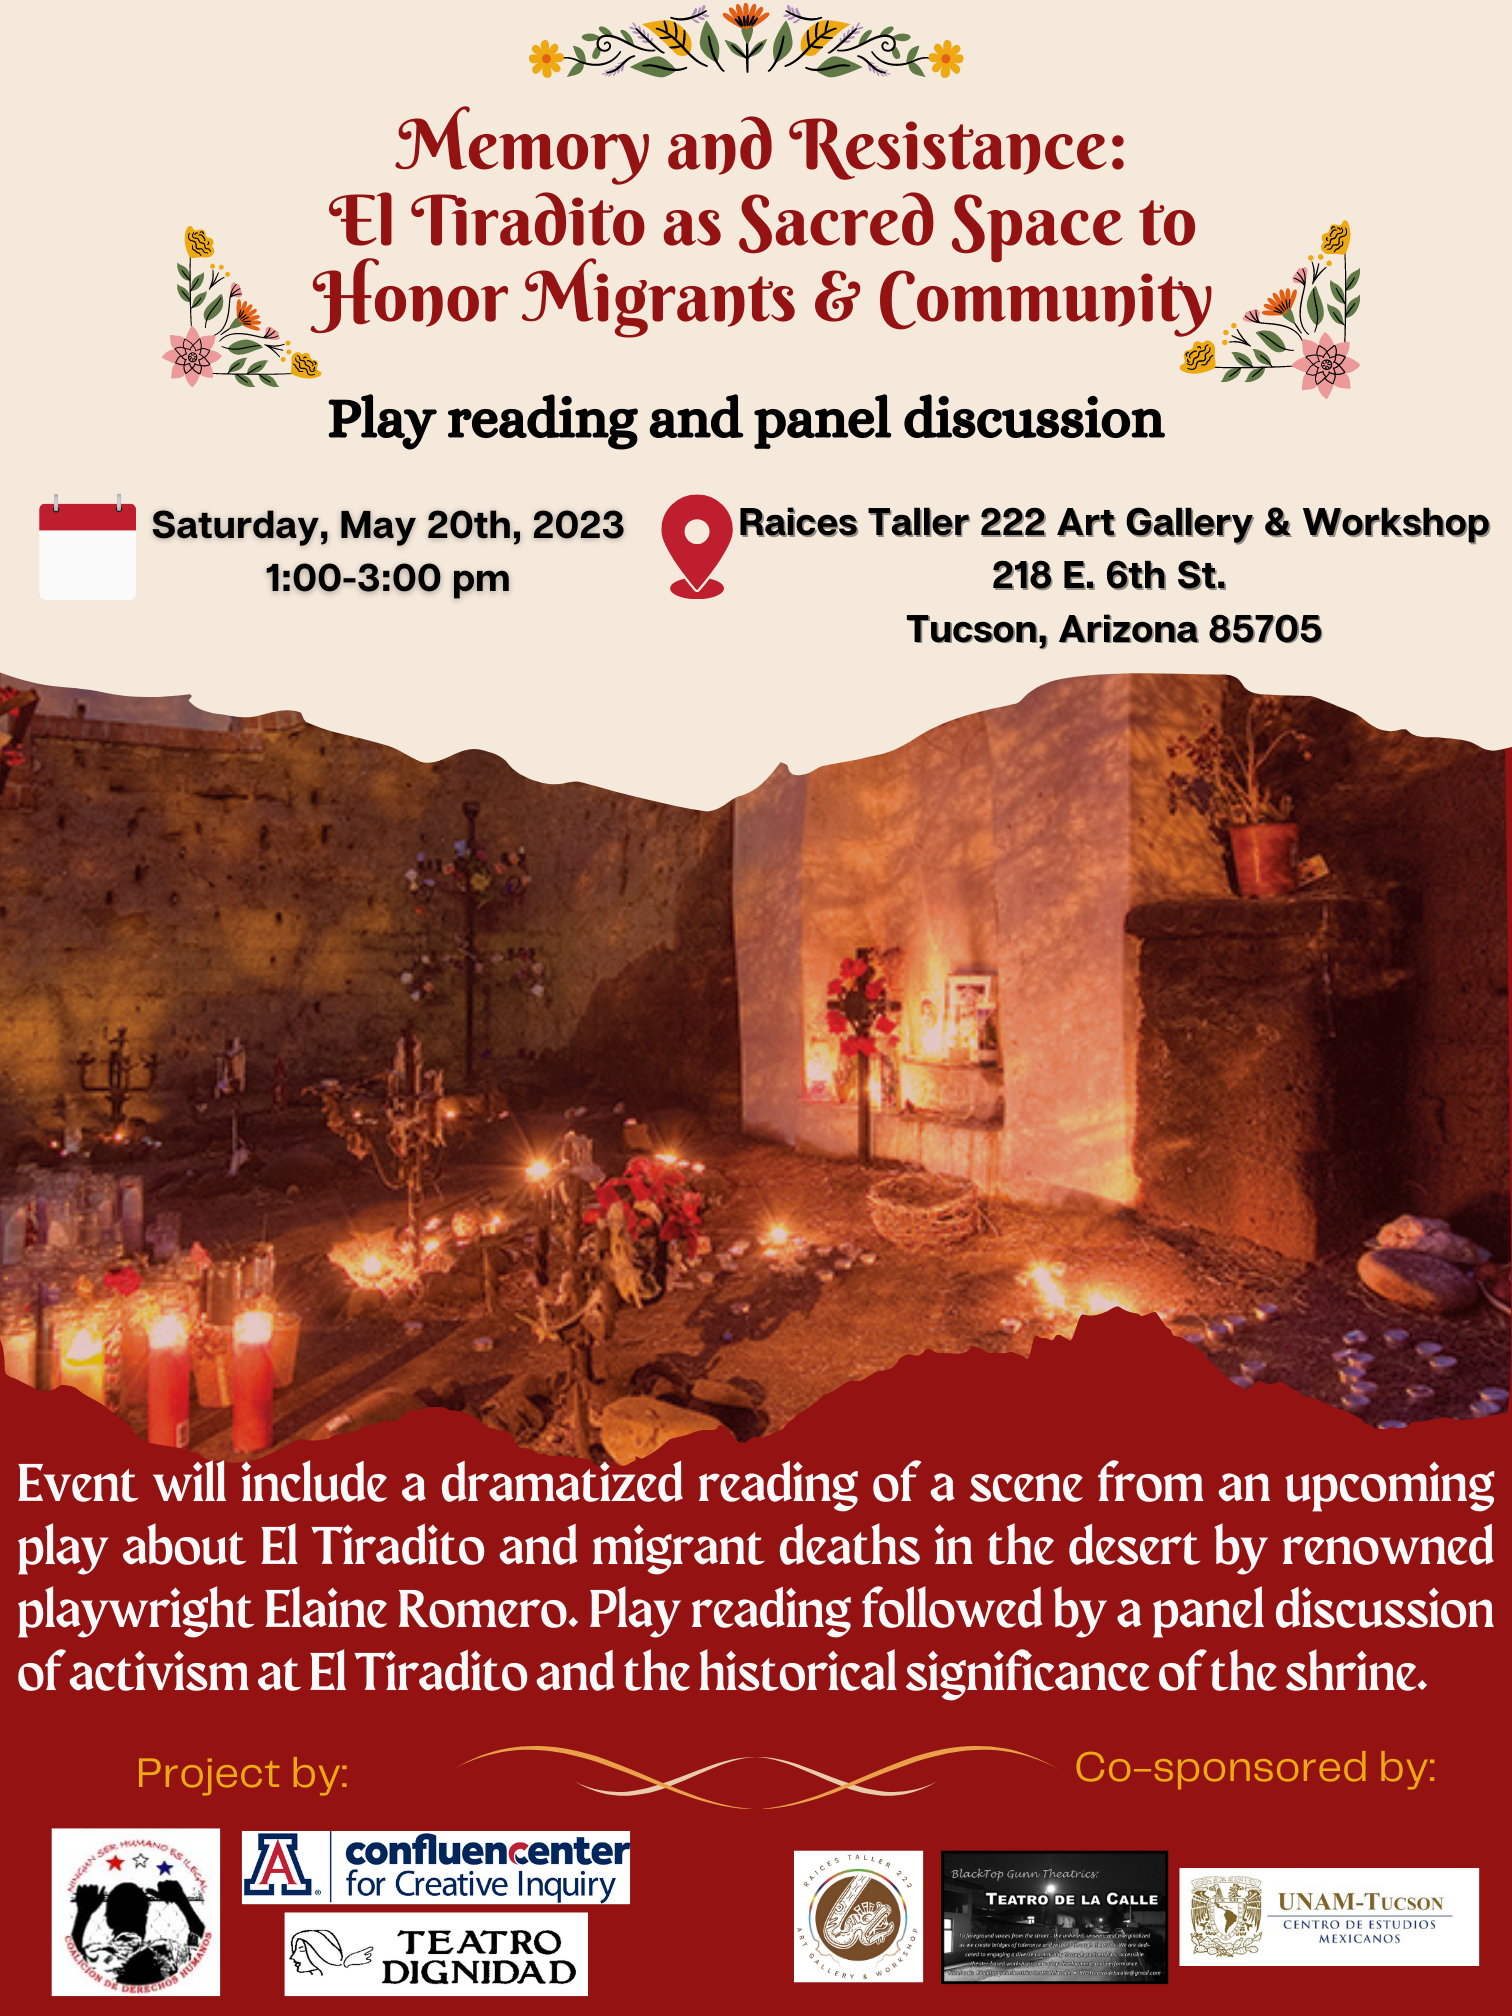 Memory and Resistance: El Tiradito as Sacred Space to Honor Migrants & Community